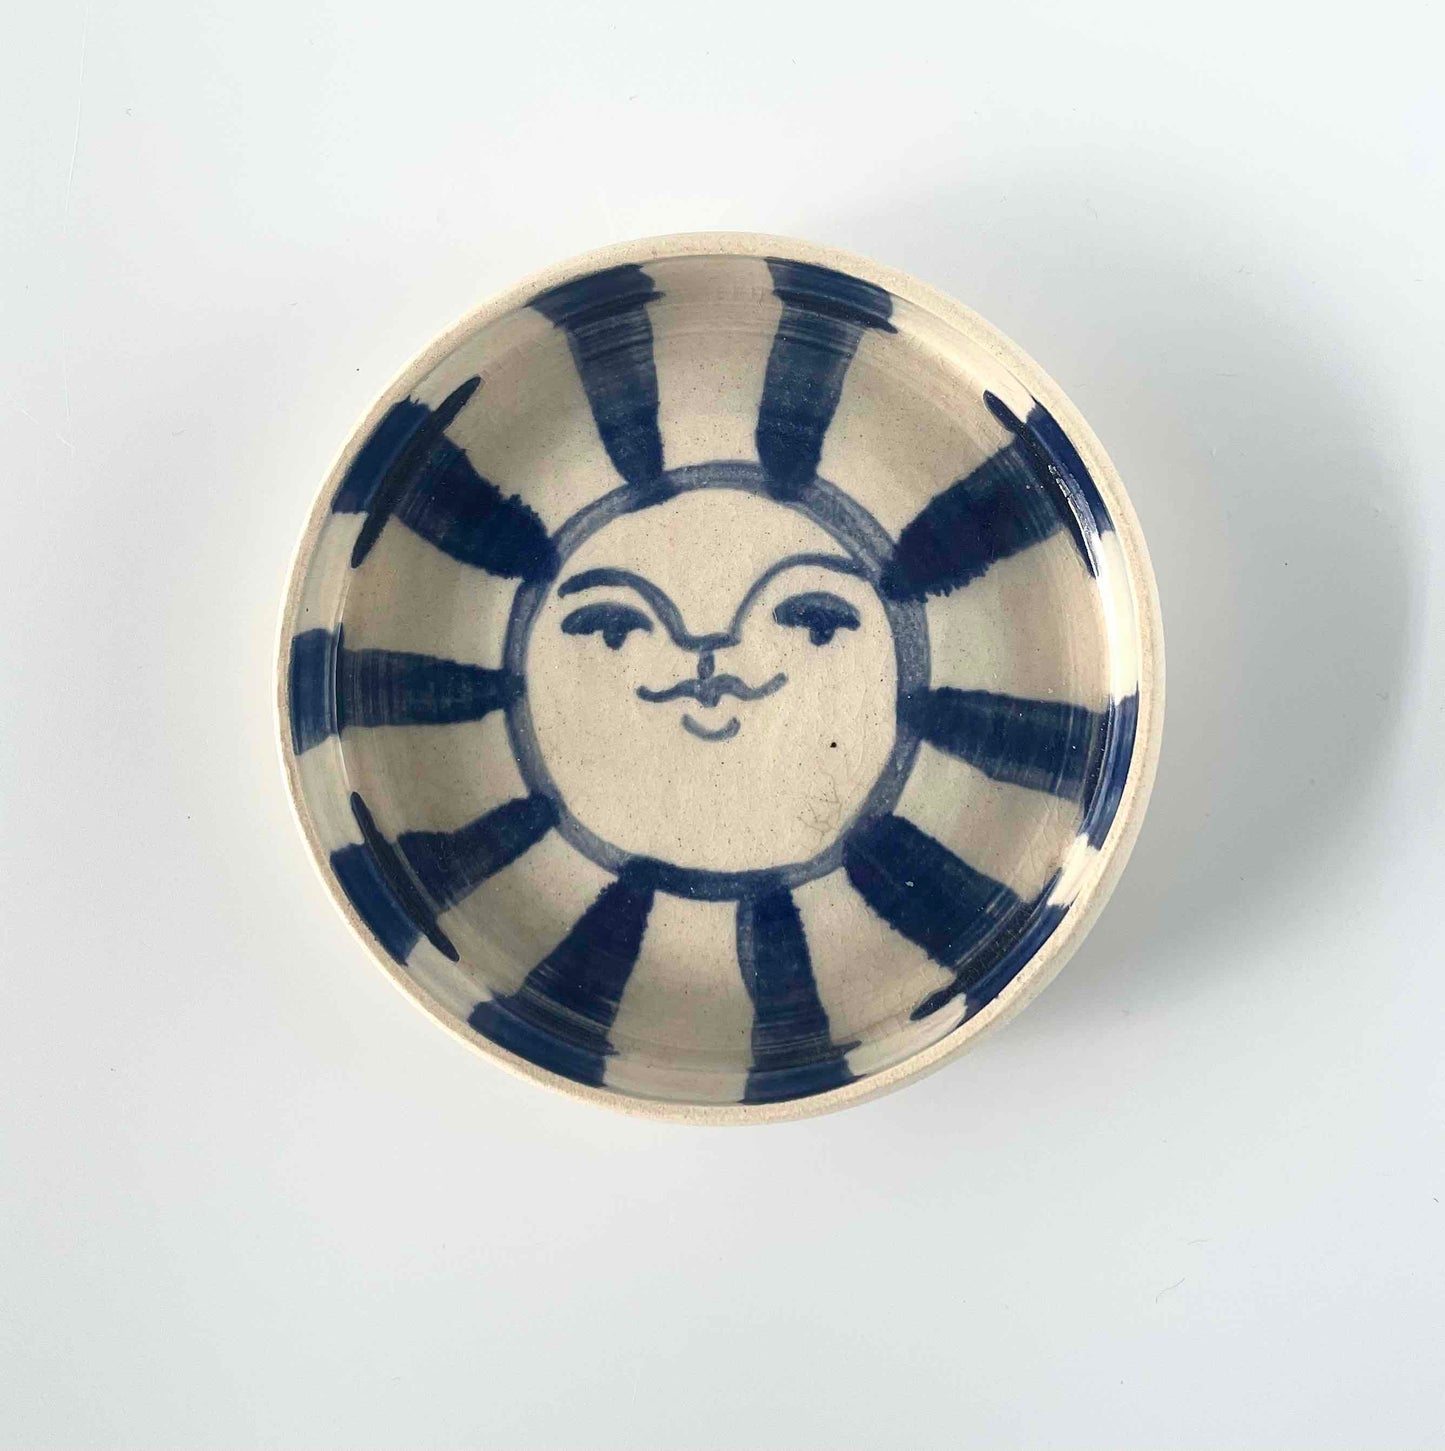 white stoneware catch-all, wheel-thrown by hey moon ceramics. Hand painted with a blue sun face on the interior.